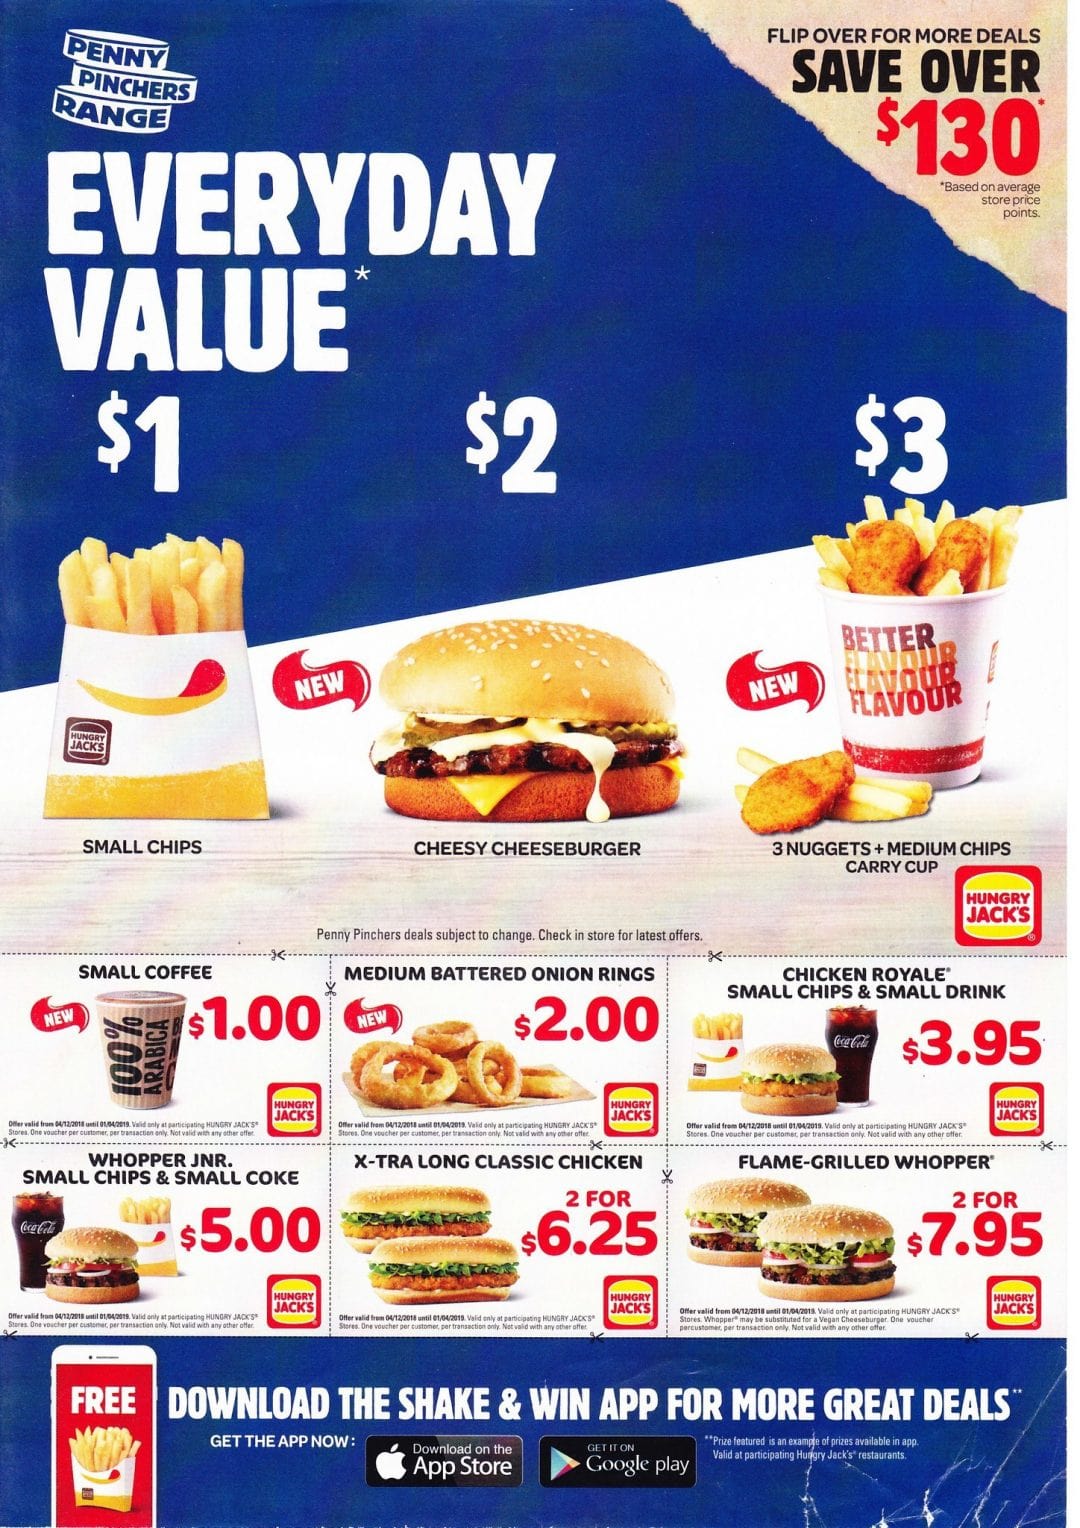 New Years Grease on the Cheap New Hungry Jacks Coupons The